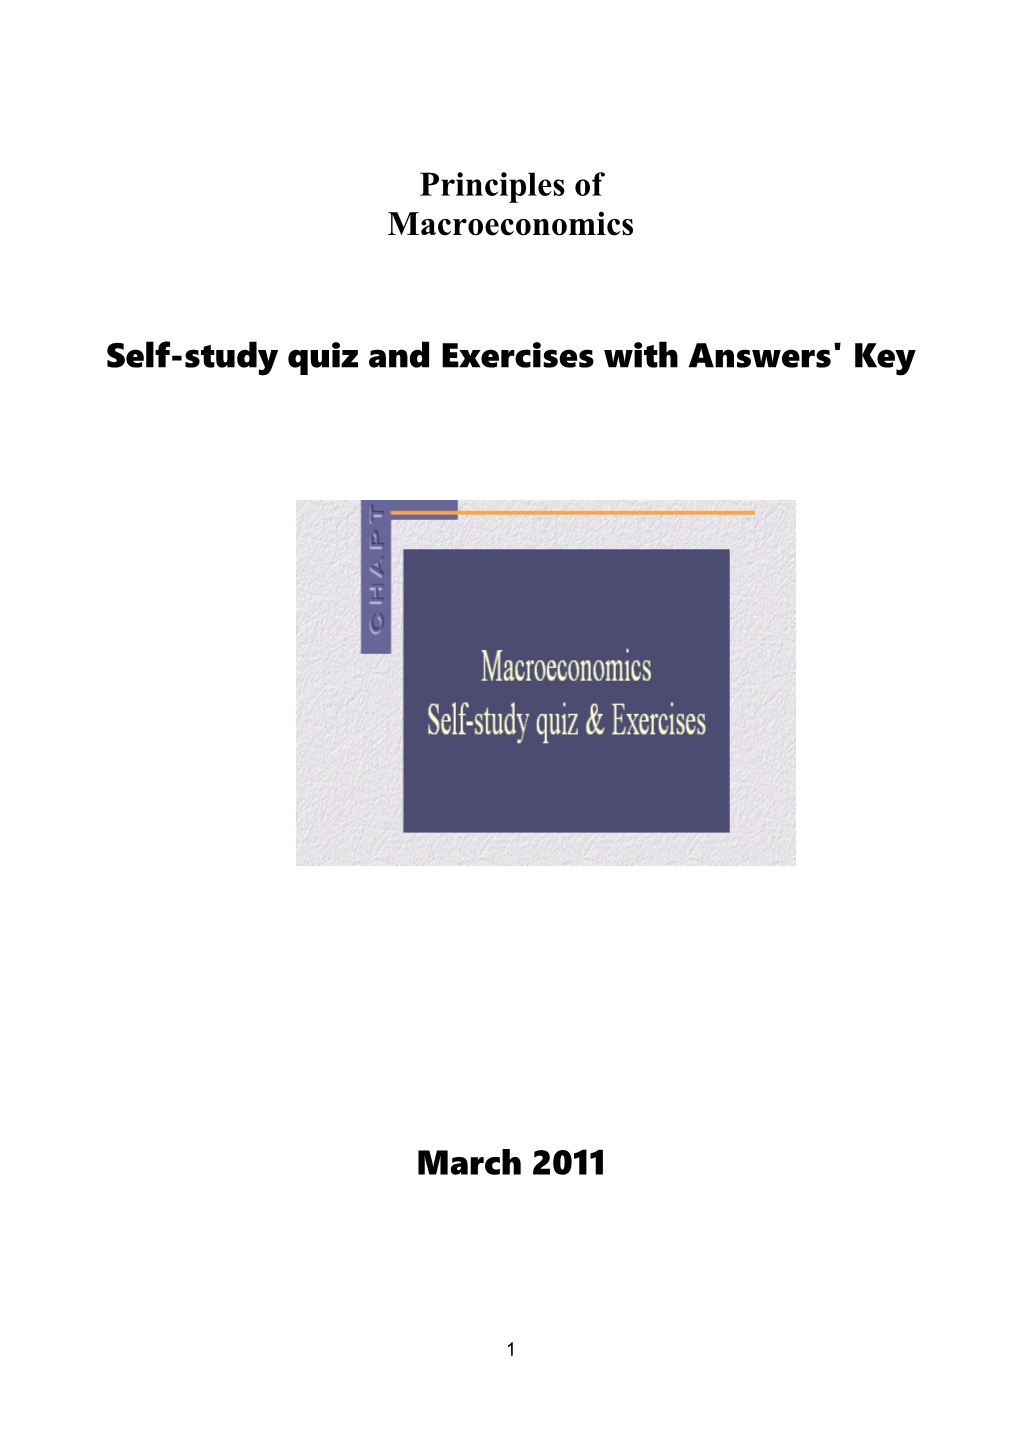 Self-Study Quiz and Exercises with Answers' Key